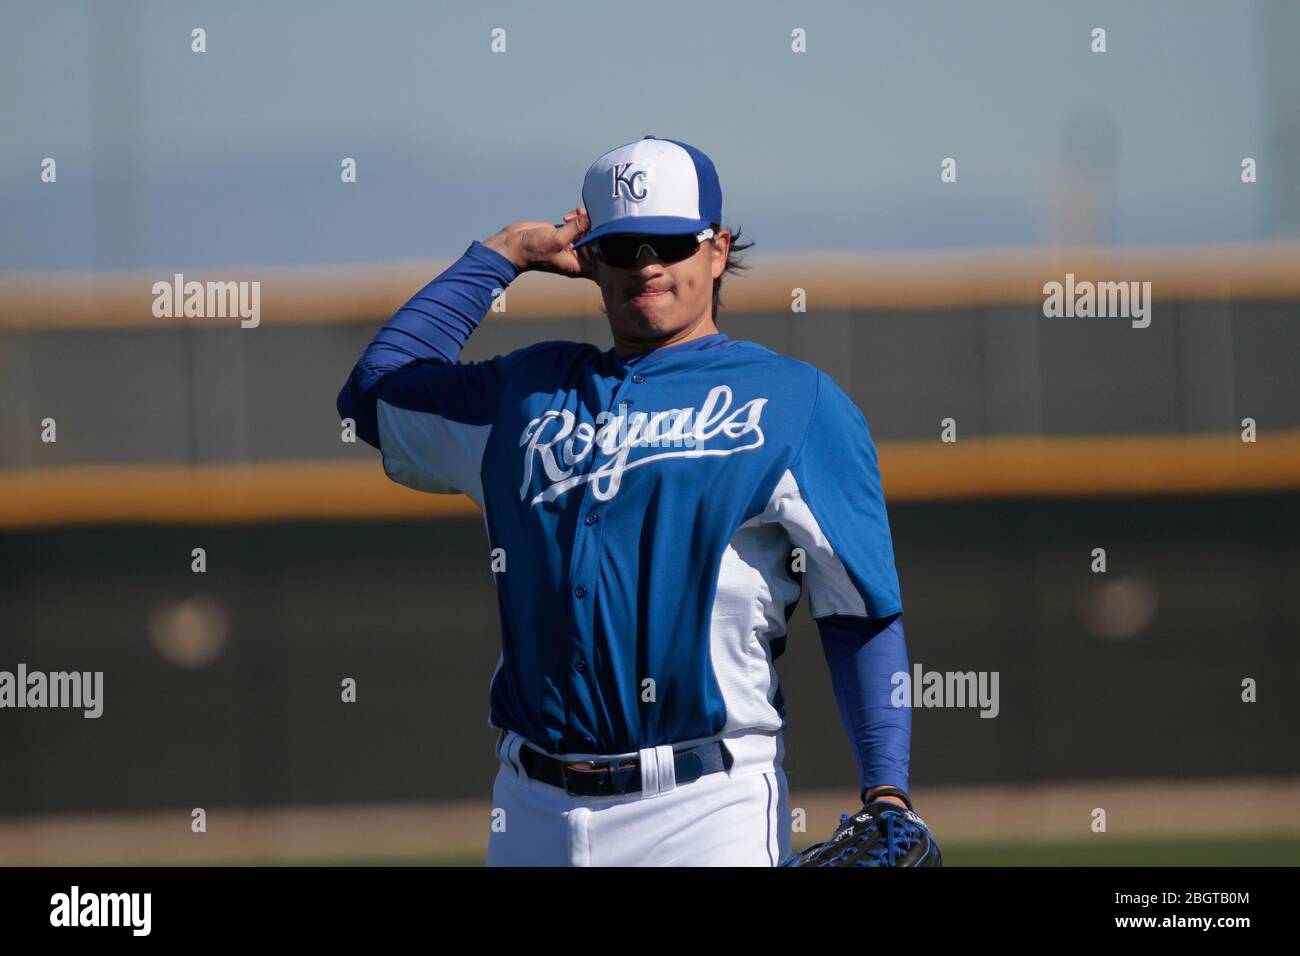 Luis Alonso Mendoza or Luis Mendoza pitcher during spring training for the  Royals of Kasas City at the surprise baseball complex. Major League Basebal  Stock Photo - Alamy